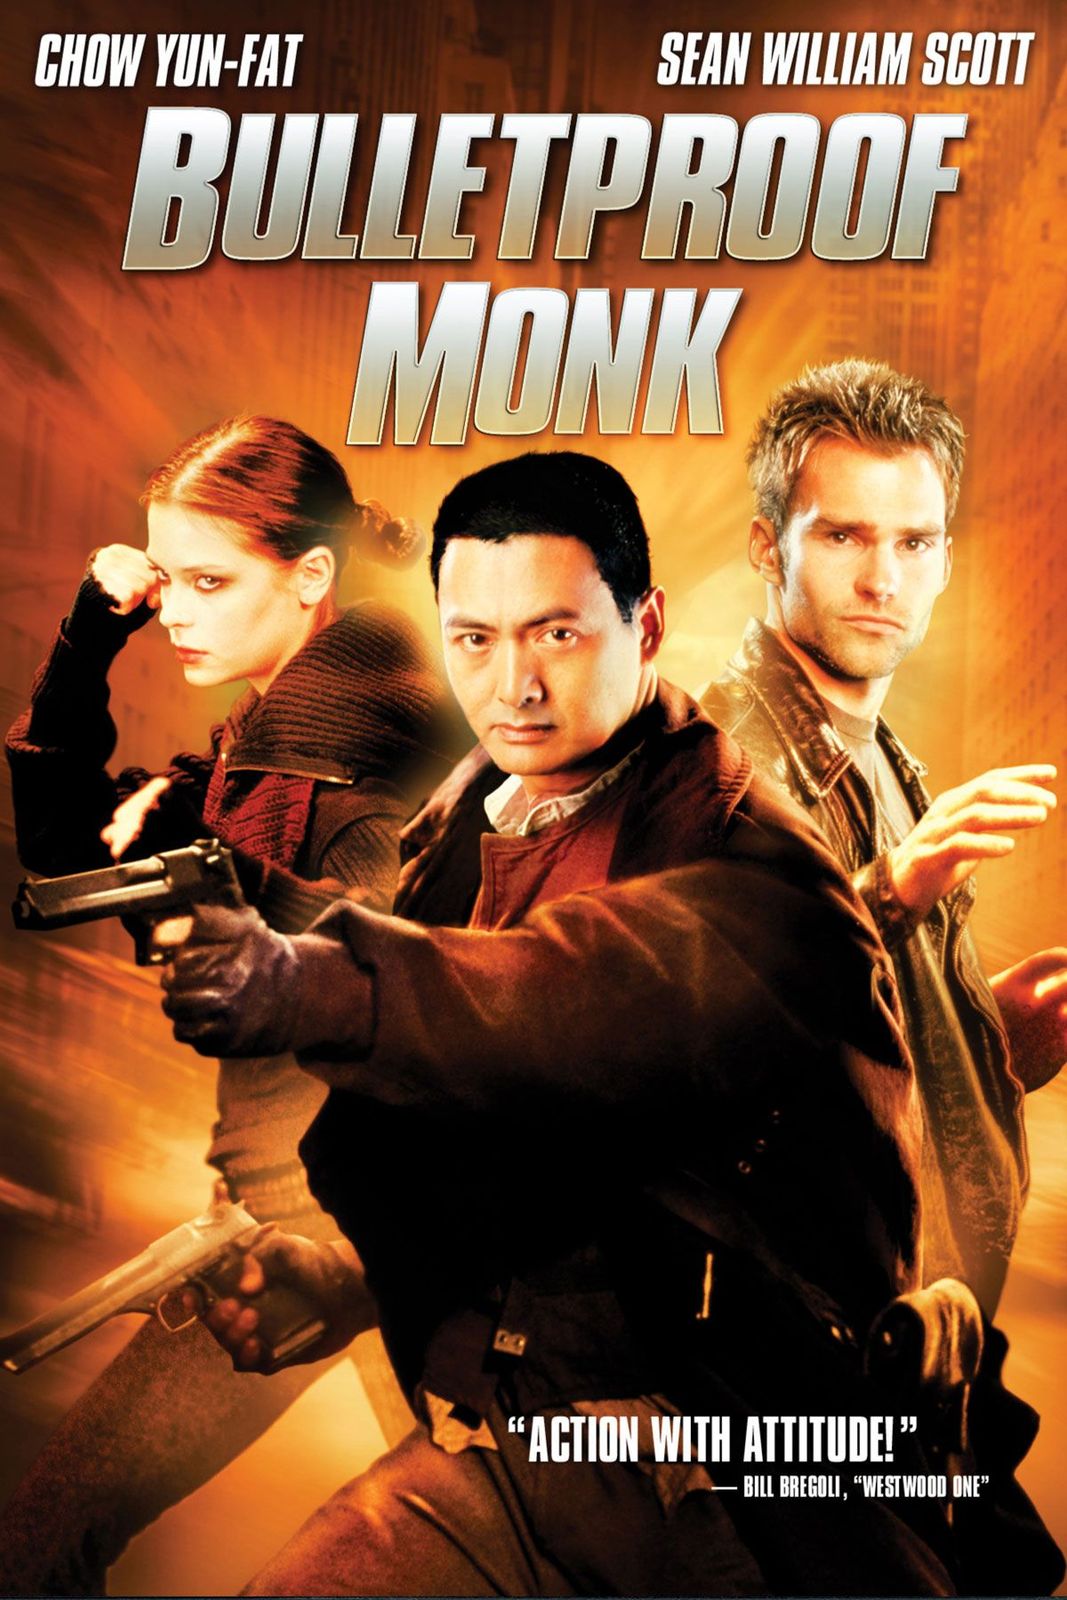 where can i download bulletproof monk movie free